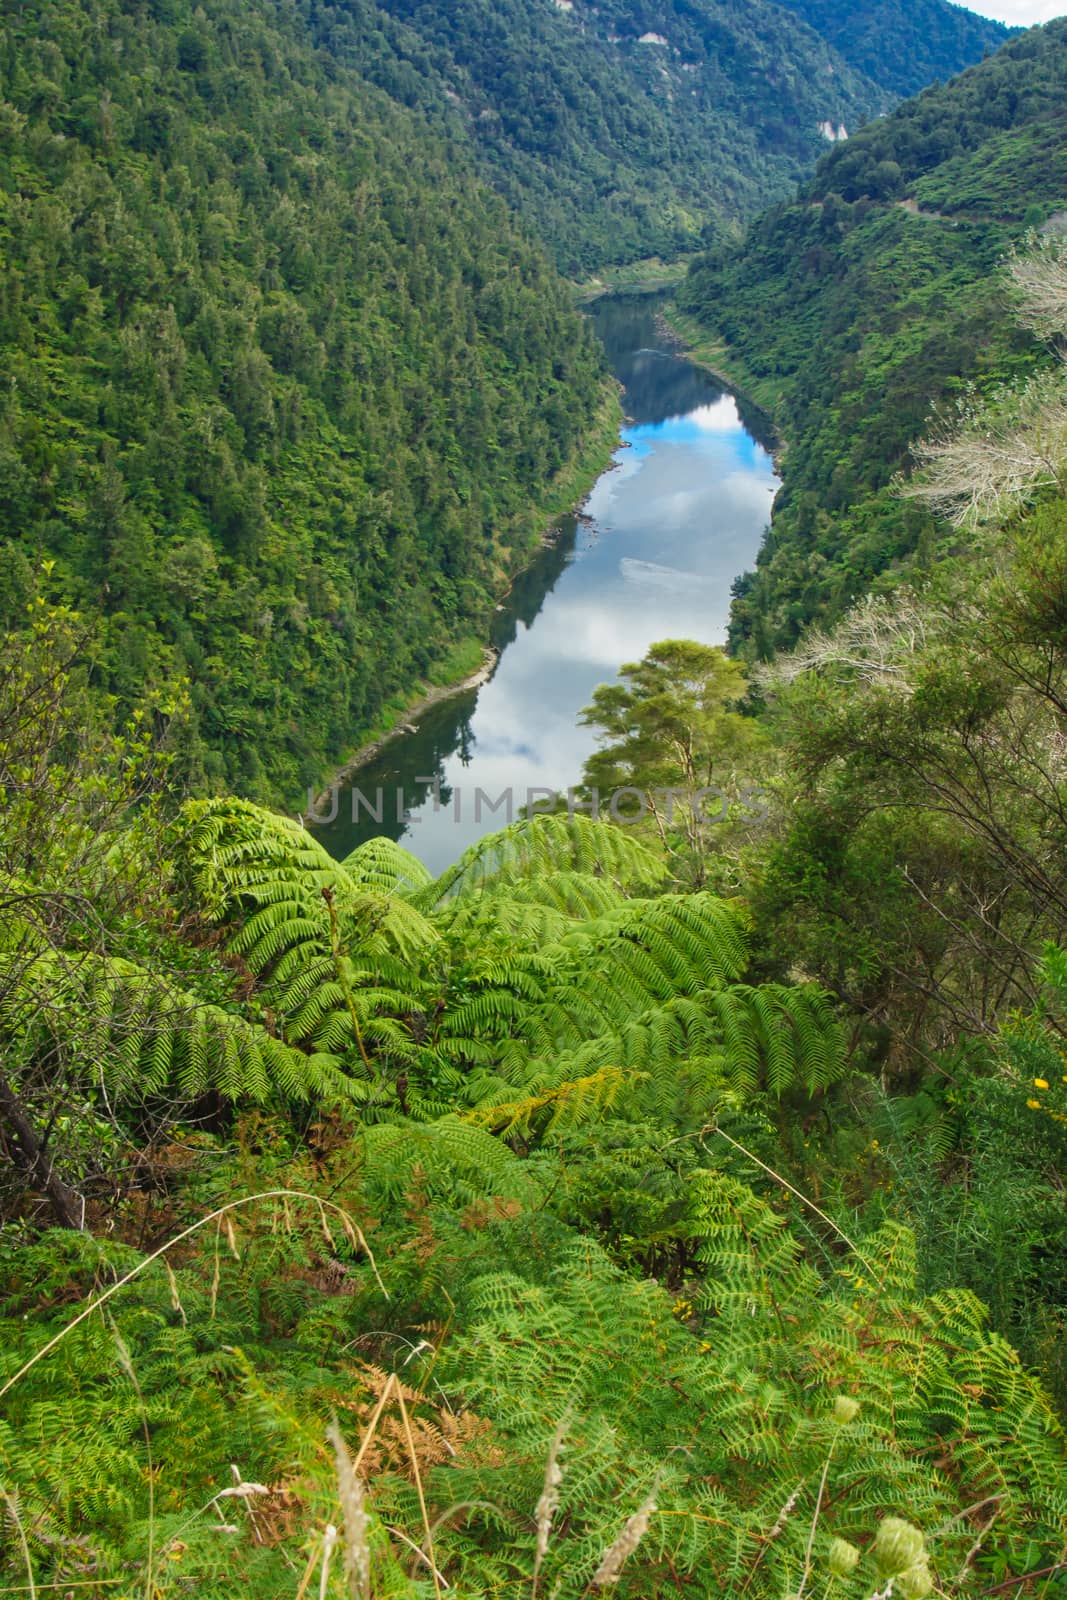 View of the Whanganui River, North Island, New Zealand